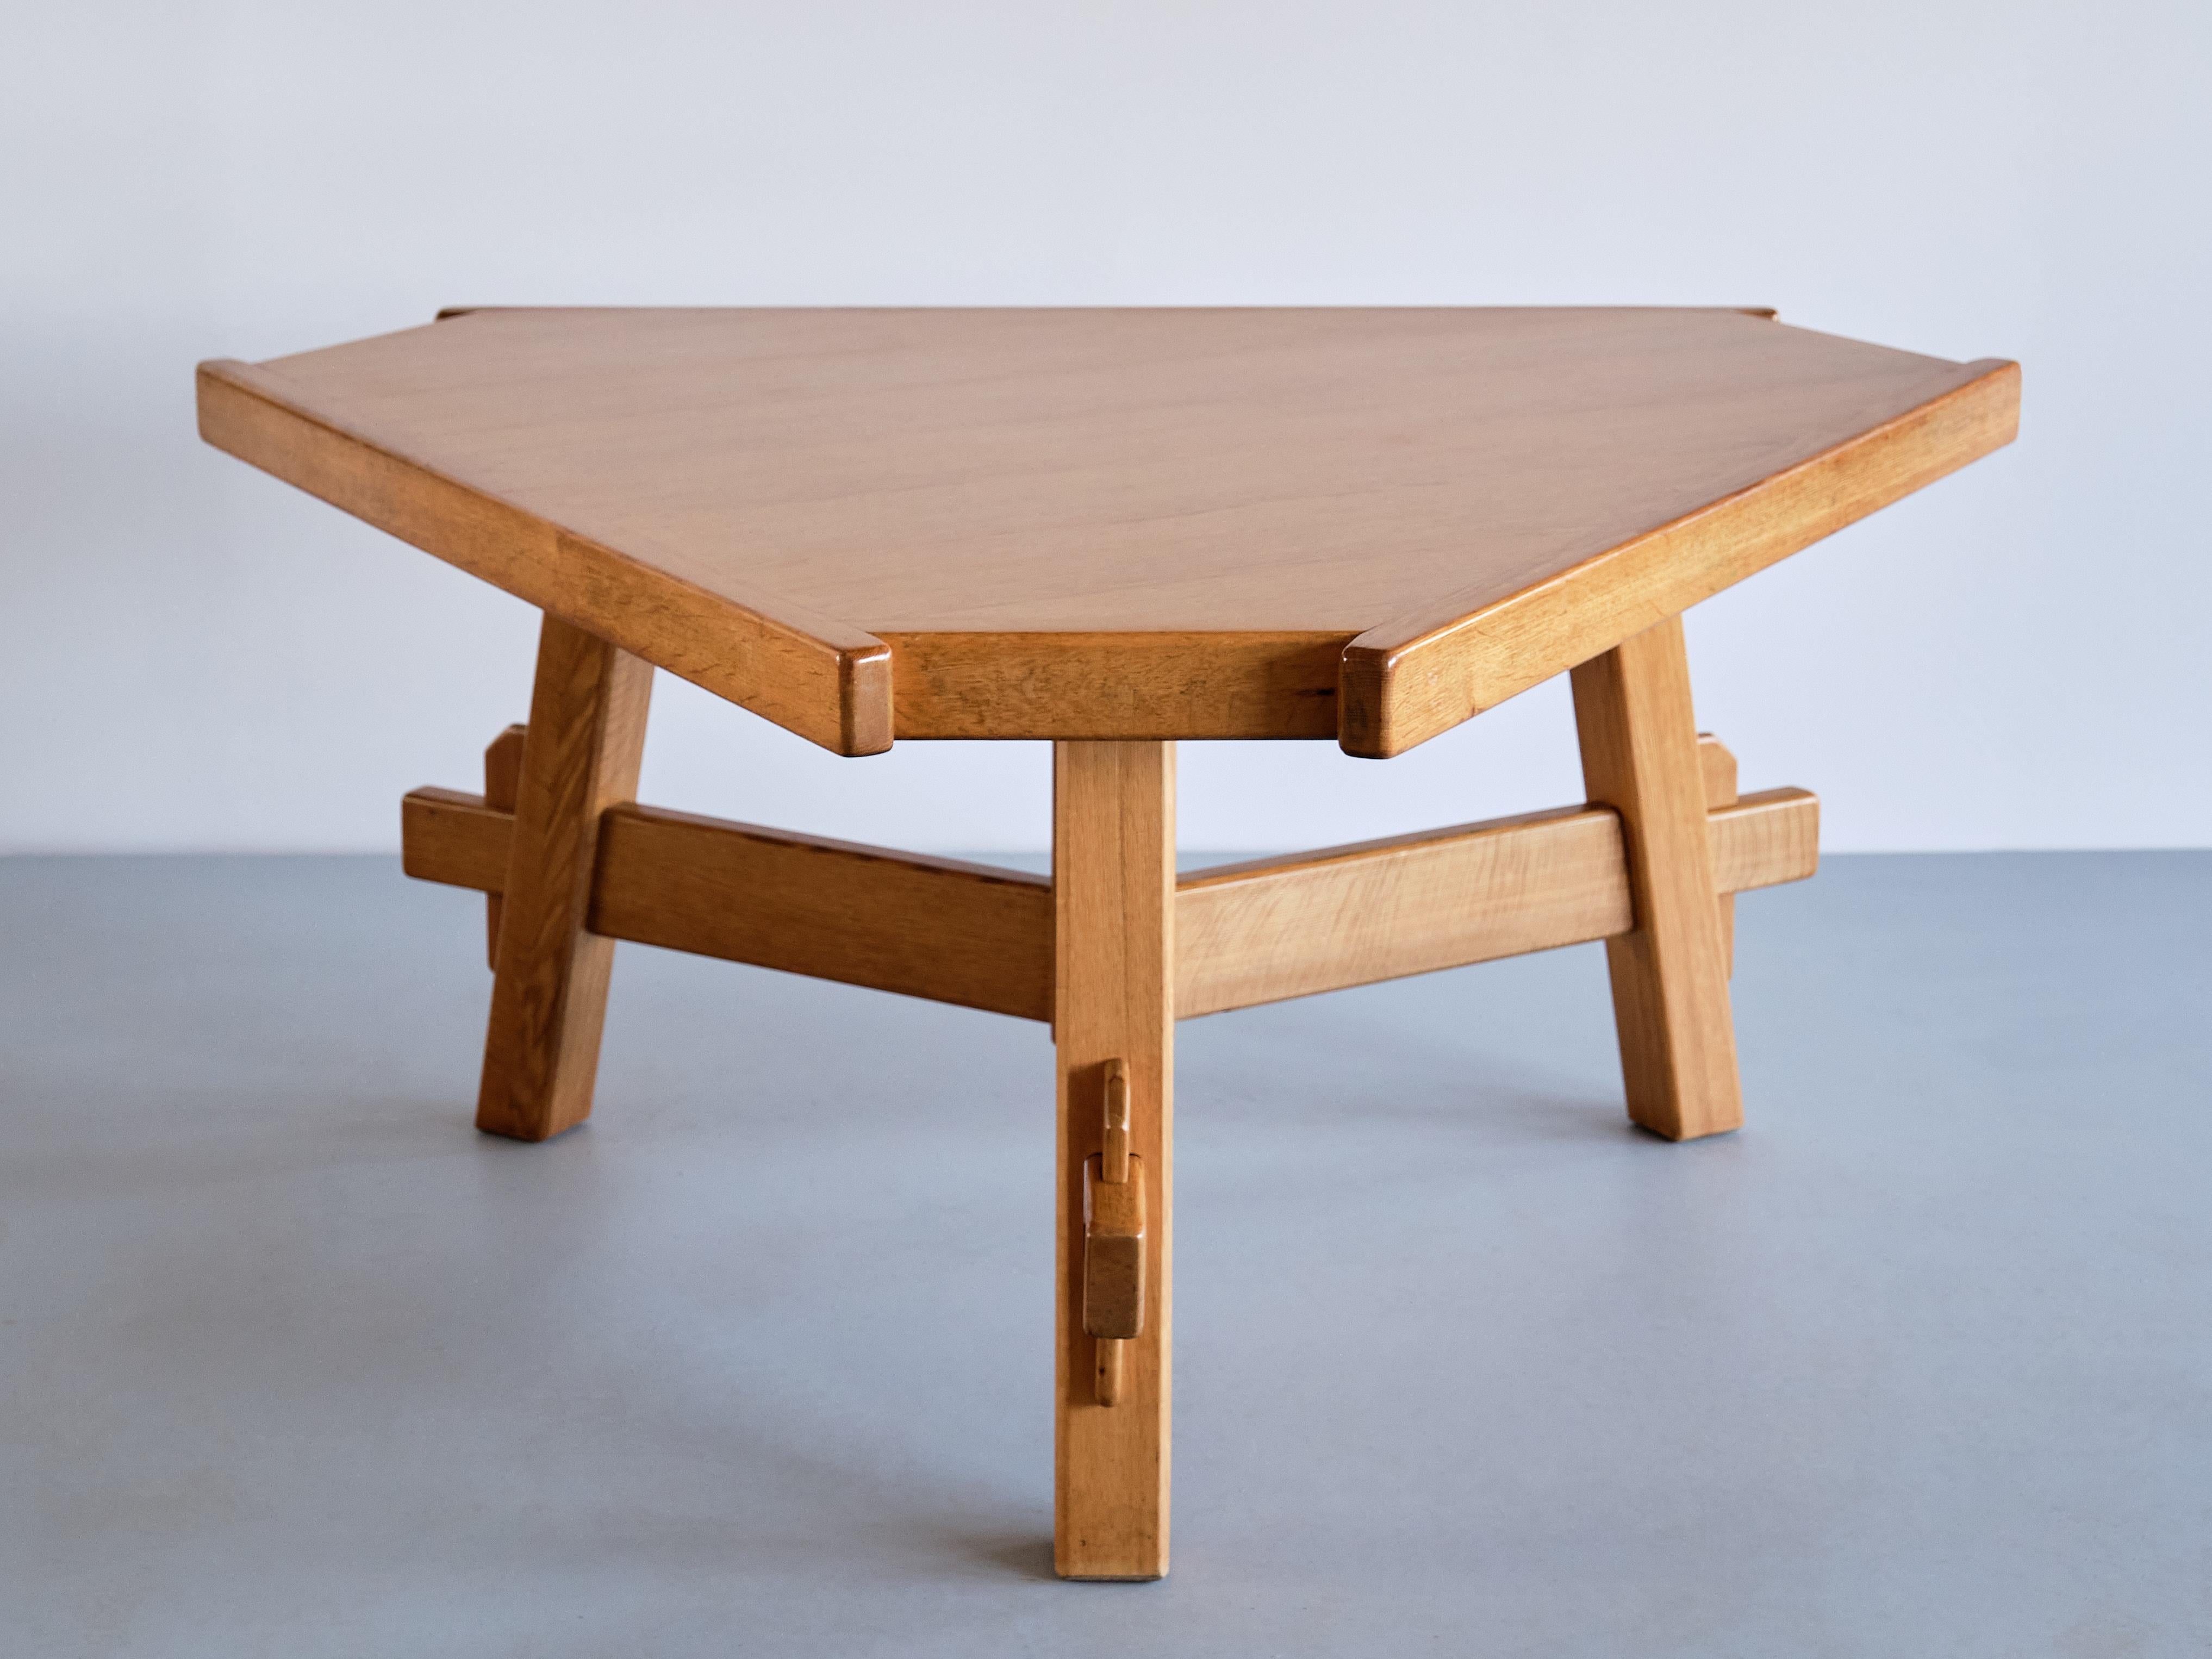 Triangular French Modern Dining Table in Solid Oak Wood, France, 1960s For Sale 3